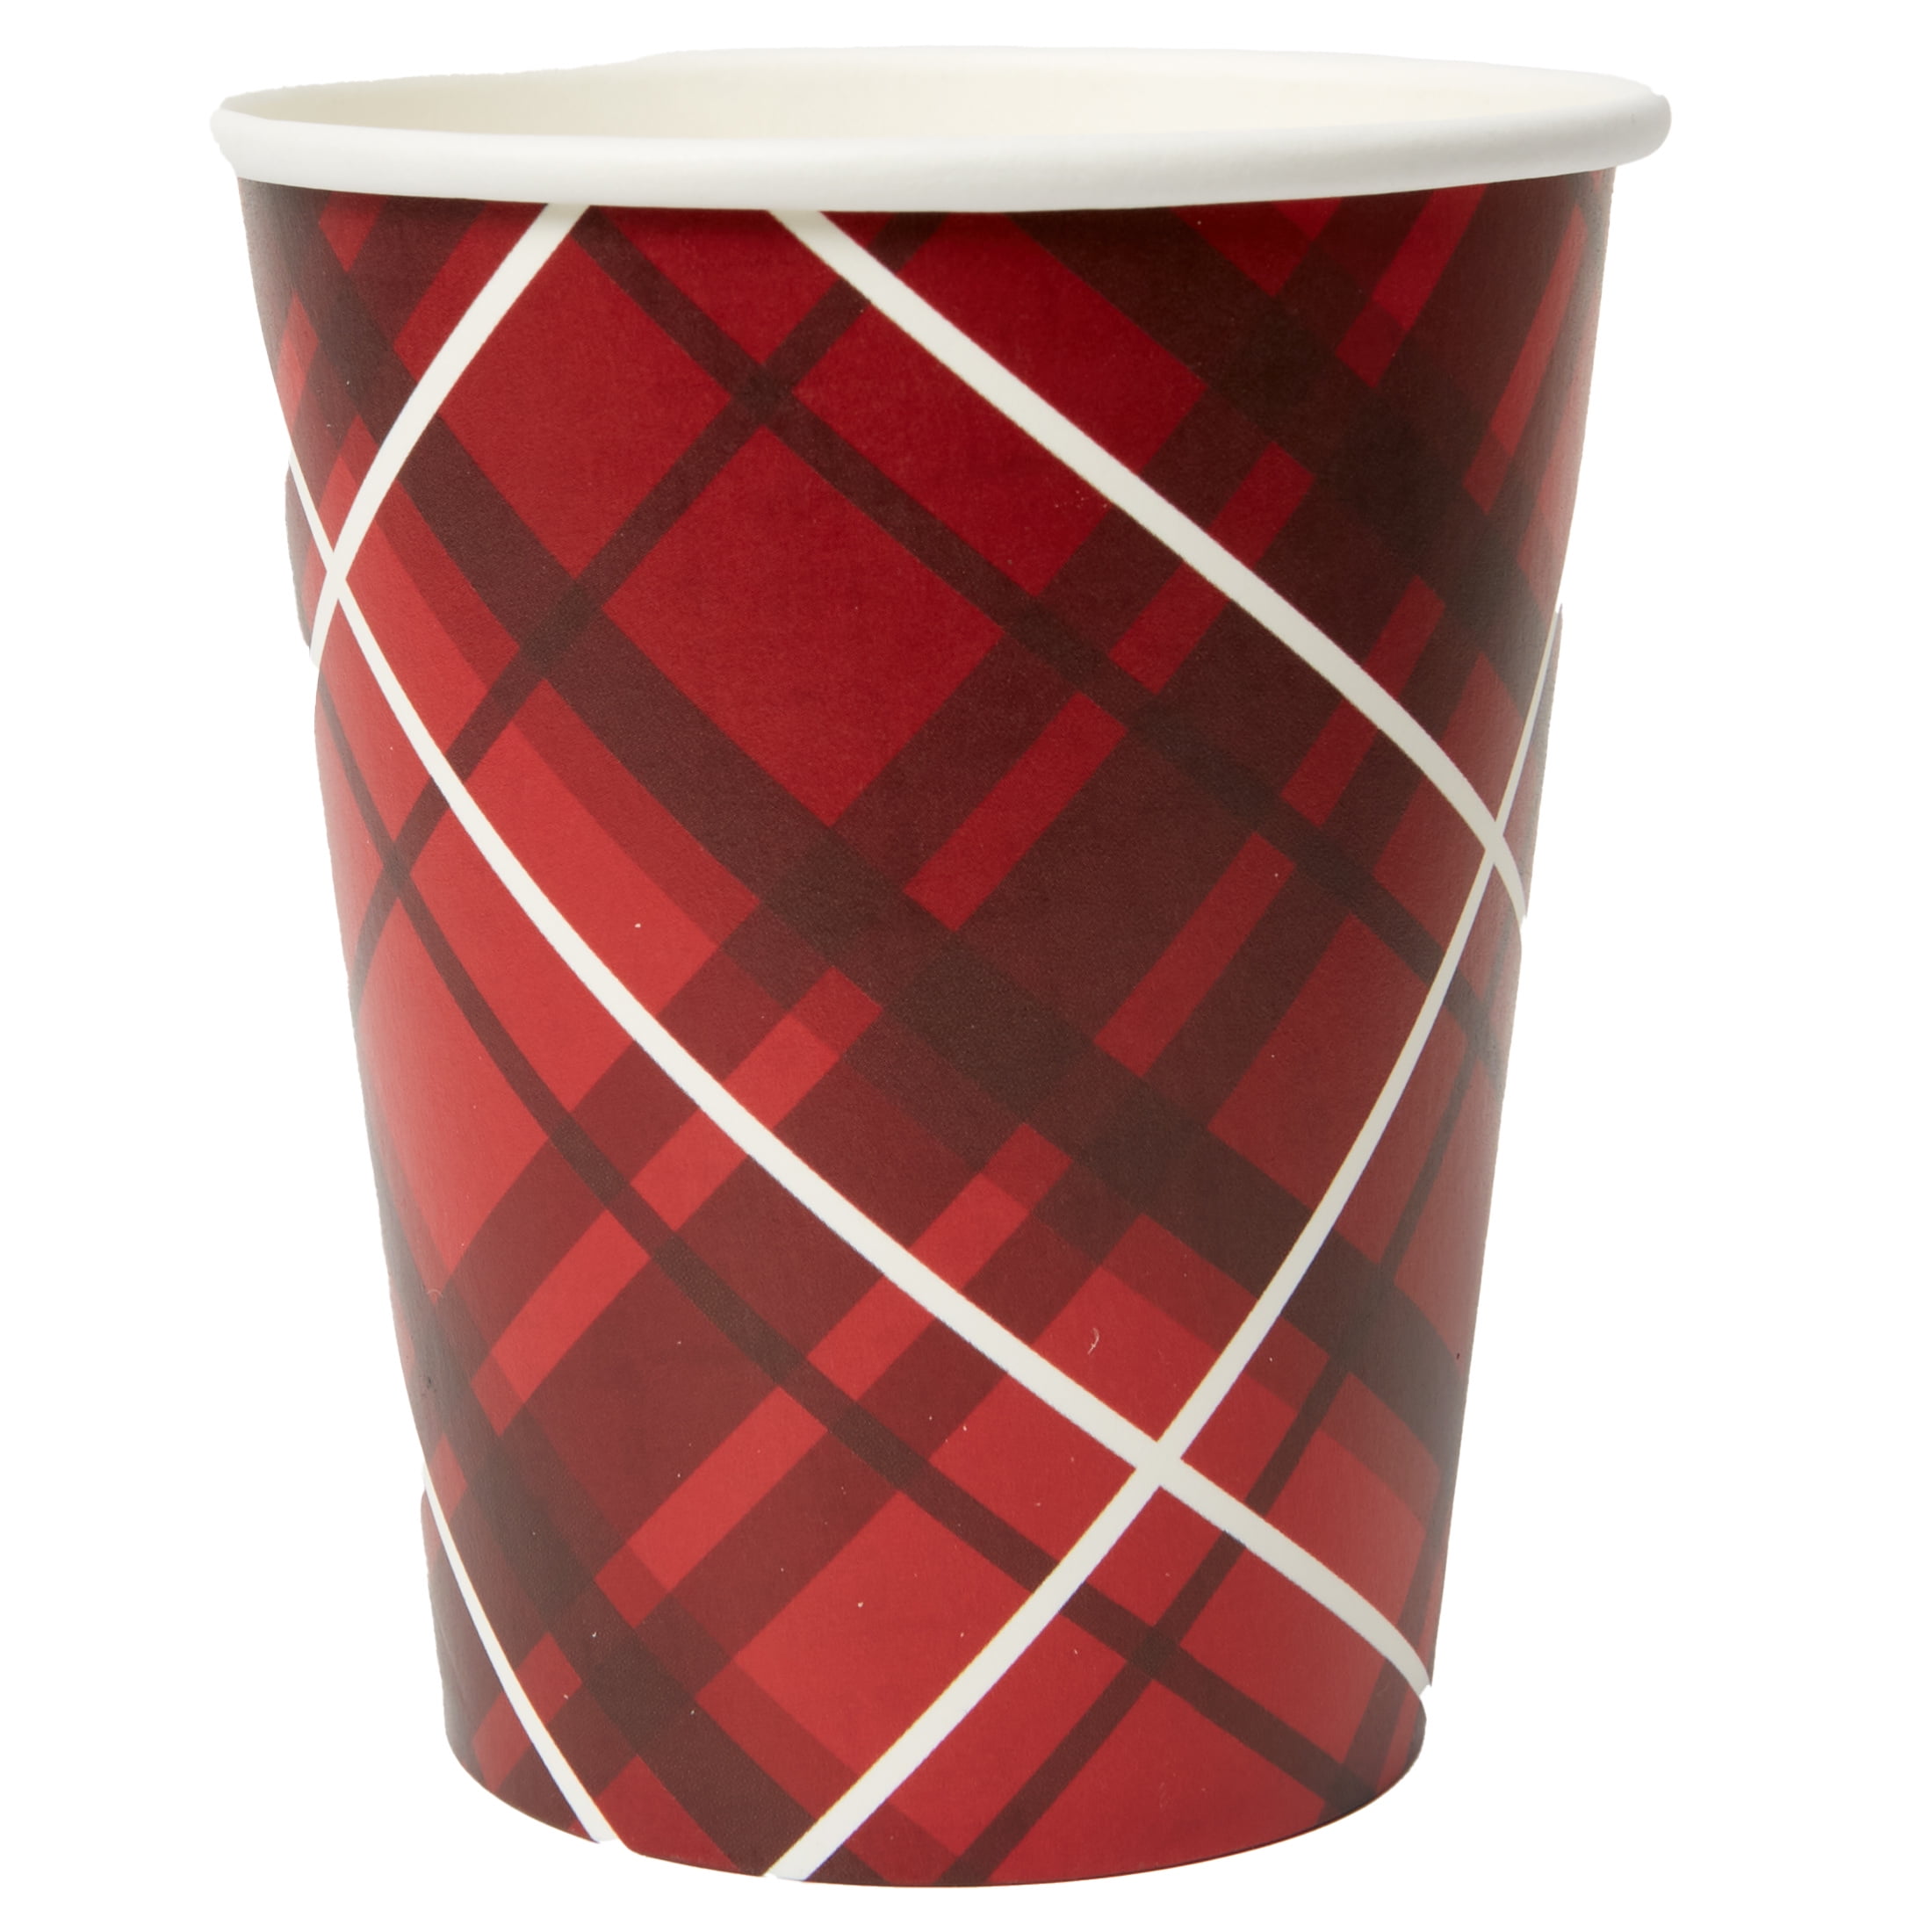 Holiday Time Plaid Premium Paper Cups, Use for Hot or Cold Beverages, 8 Count, Holds 9 Oz., Red